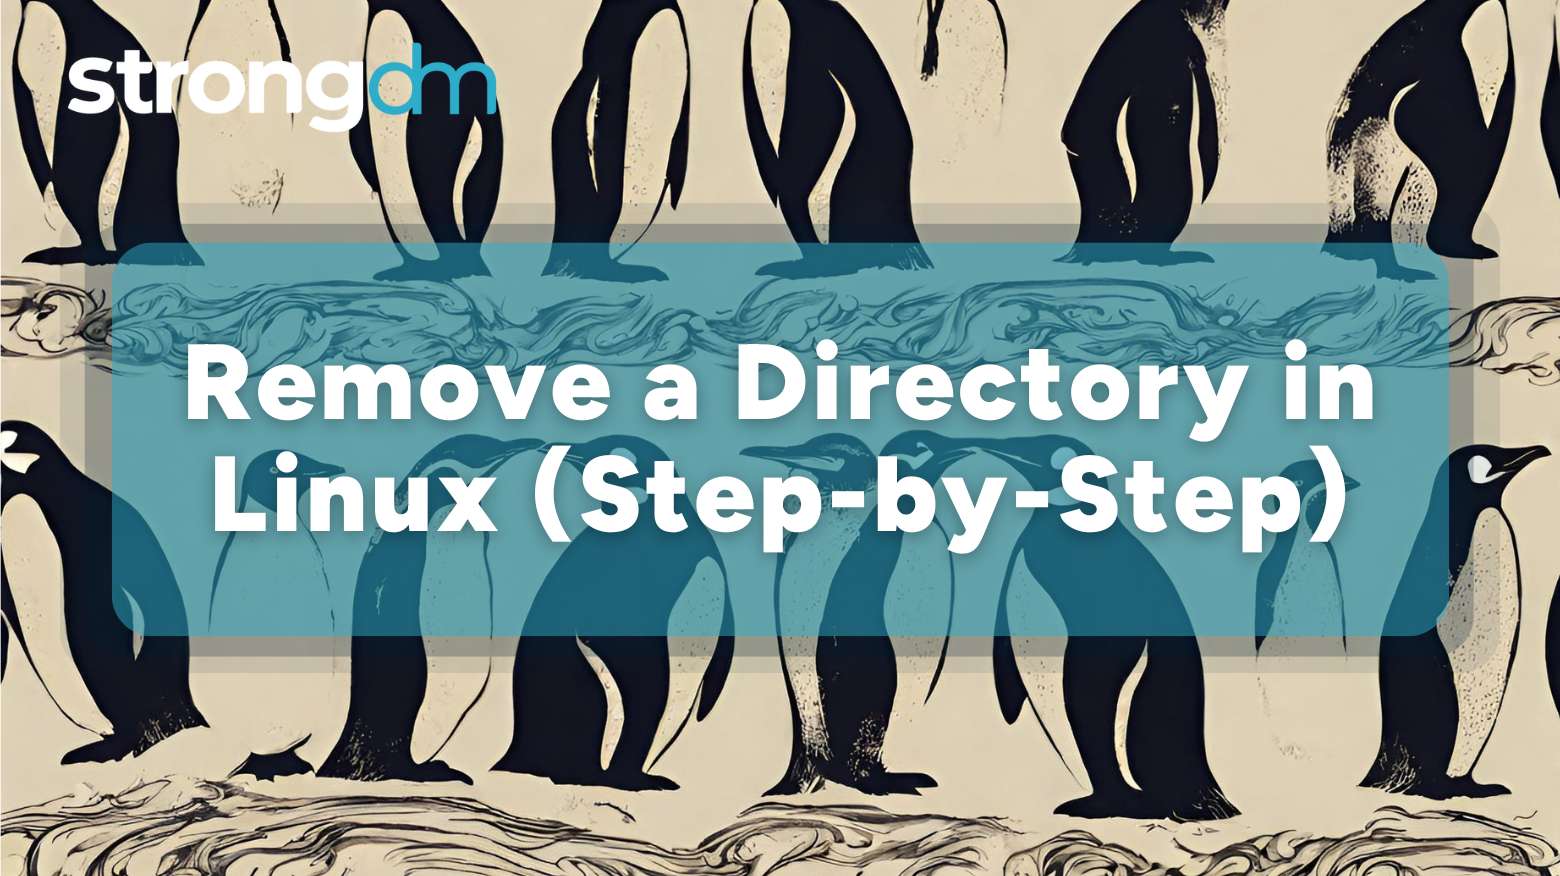 How to Remove a Directory in Linux Step-by-Step (rm & rmdir)